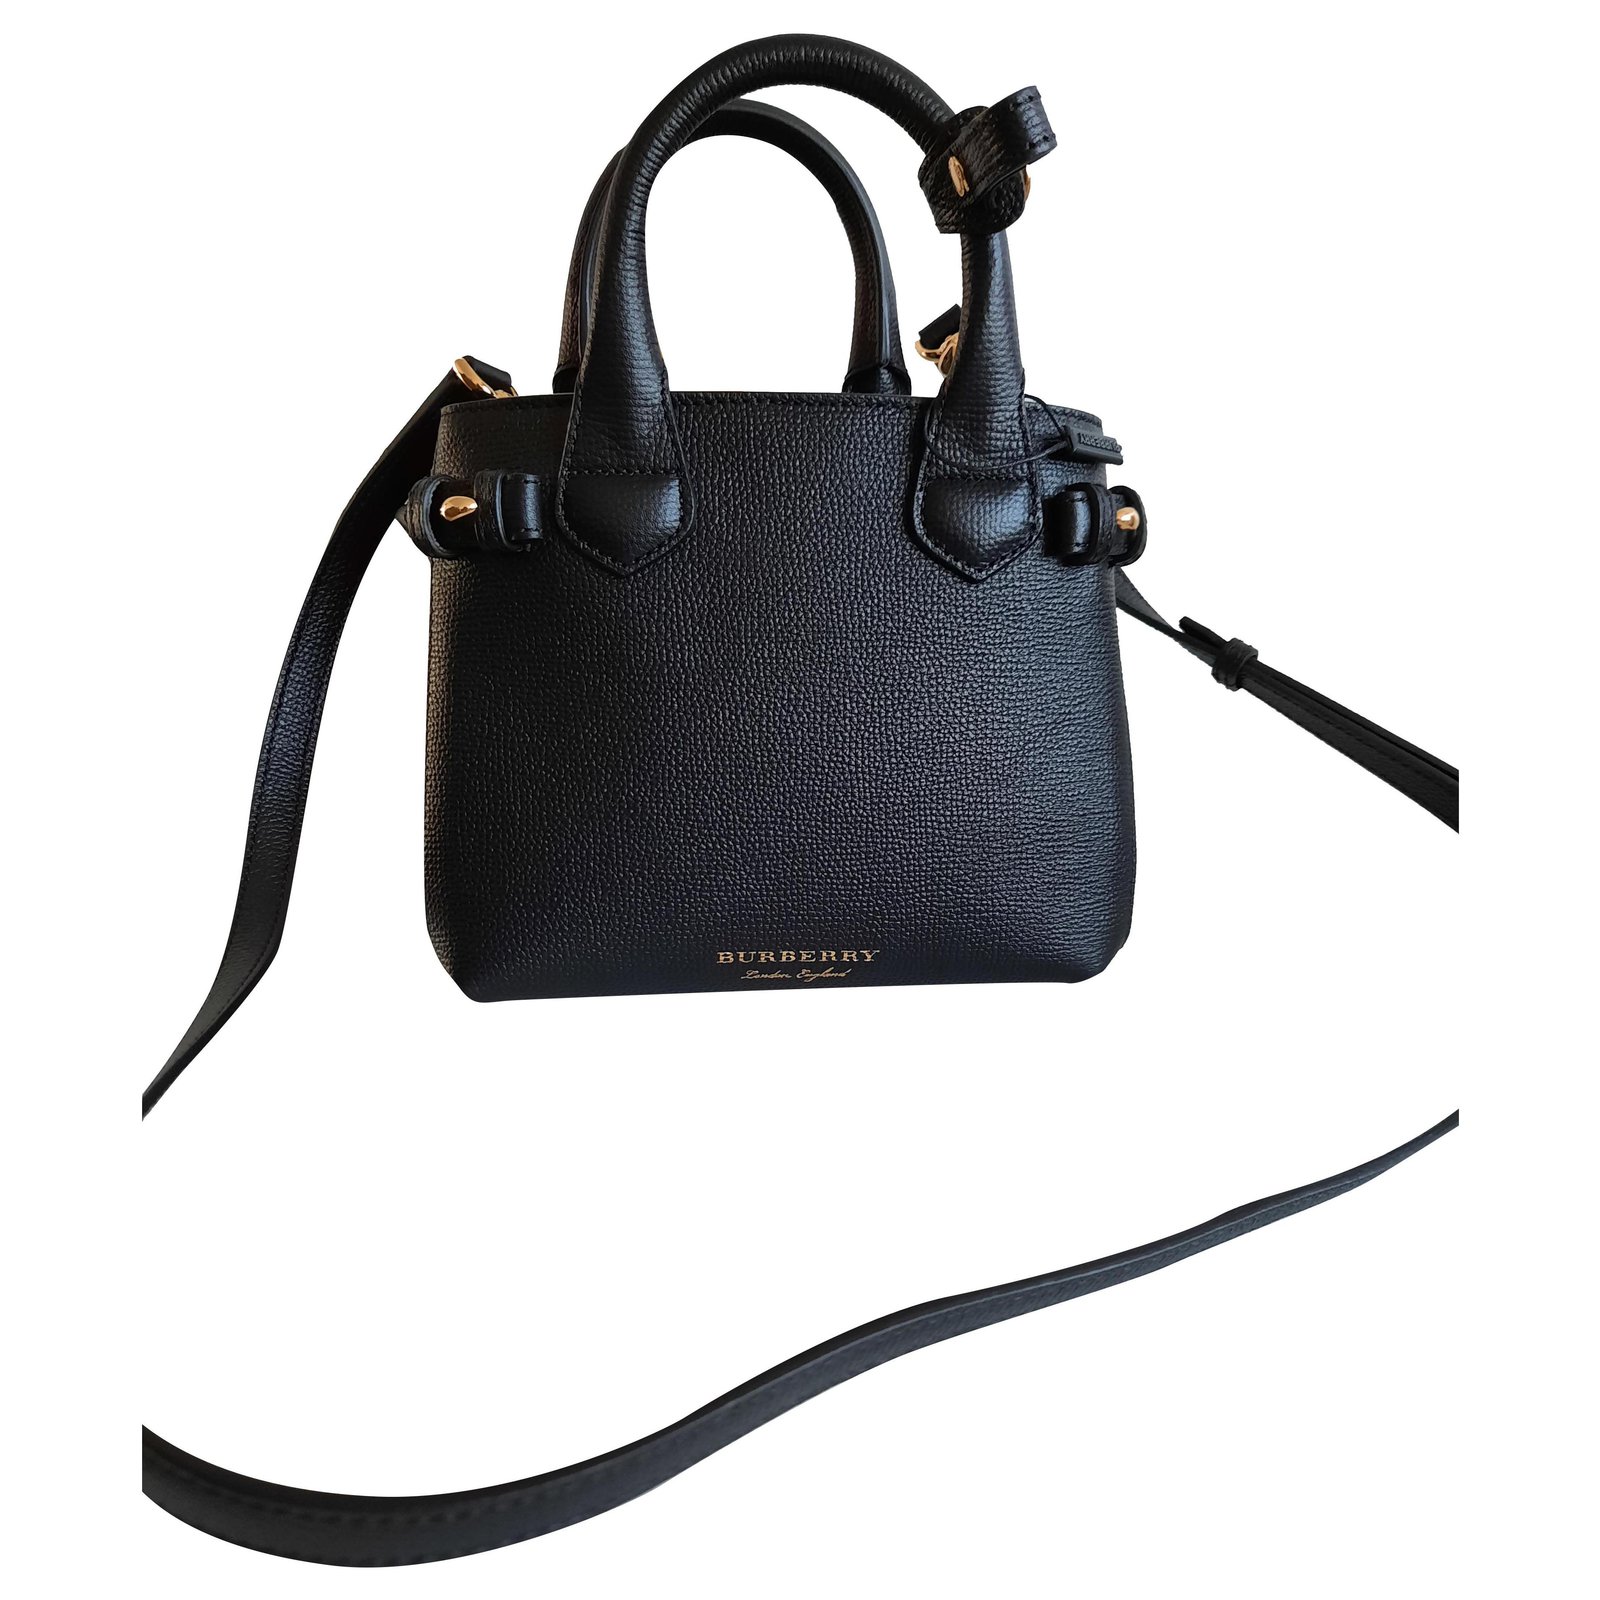 Burberry Remington Black Leather Tote Bag from Fashion Outlets of Chicago  by Annie Fairfax - Annie Fairfax